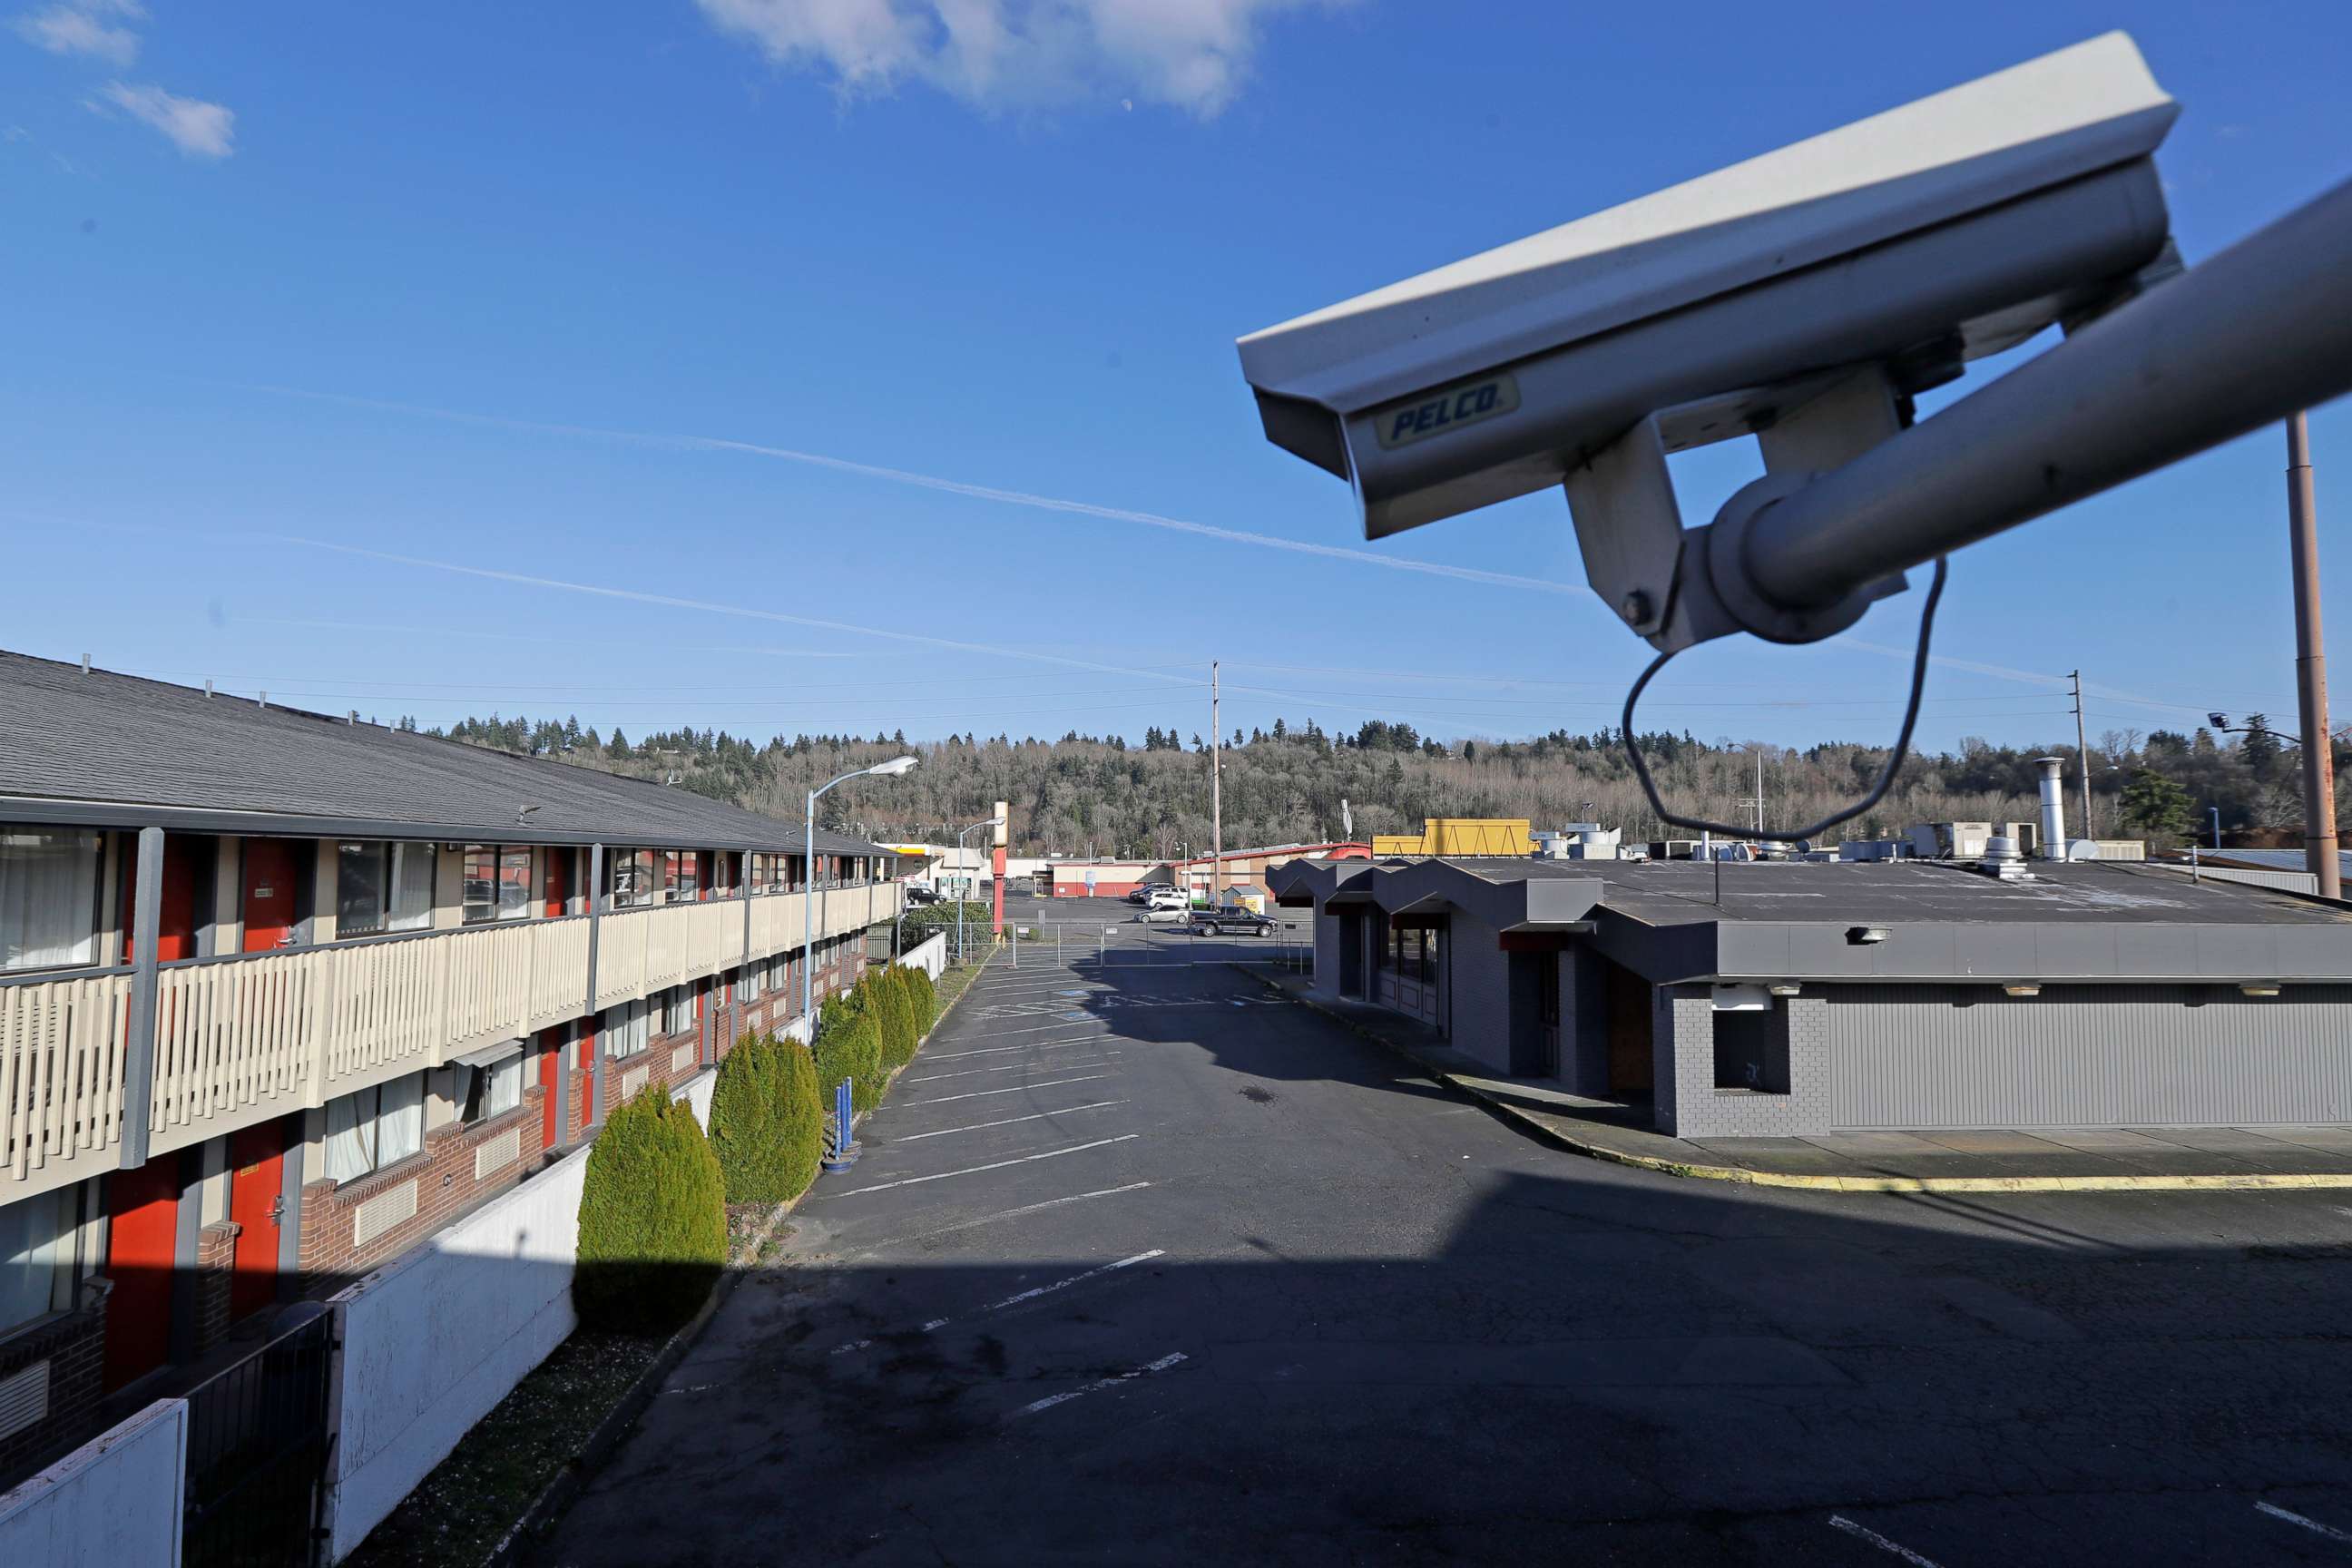 PHOTO: A security camera is shown at a motel in Kent, Wash., March 4, 2020.